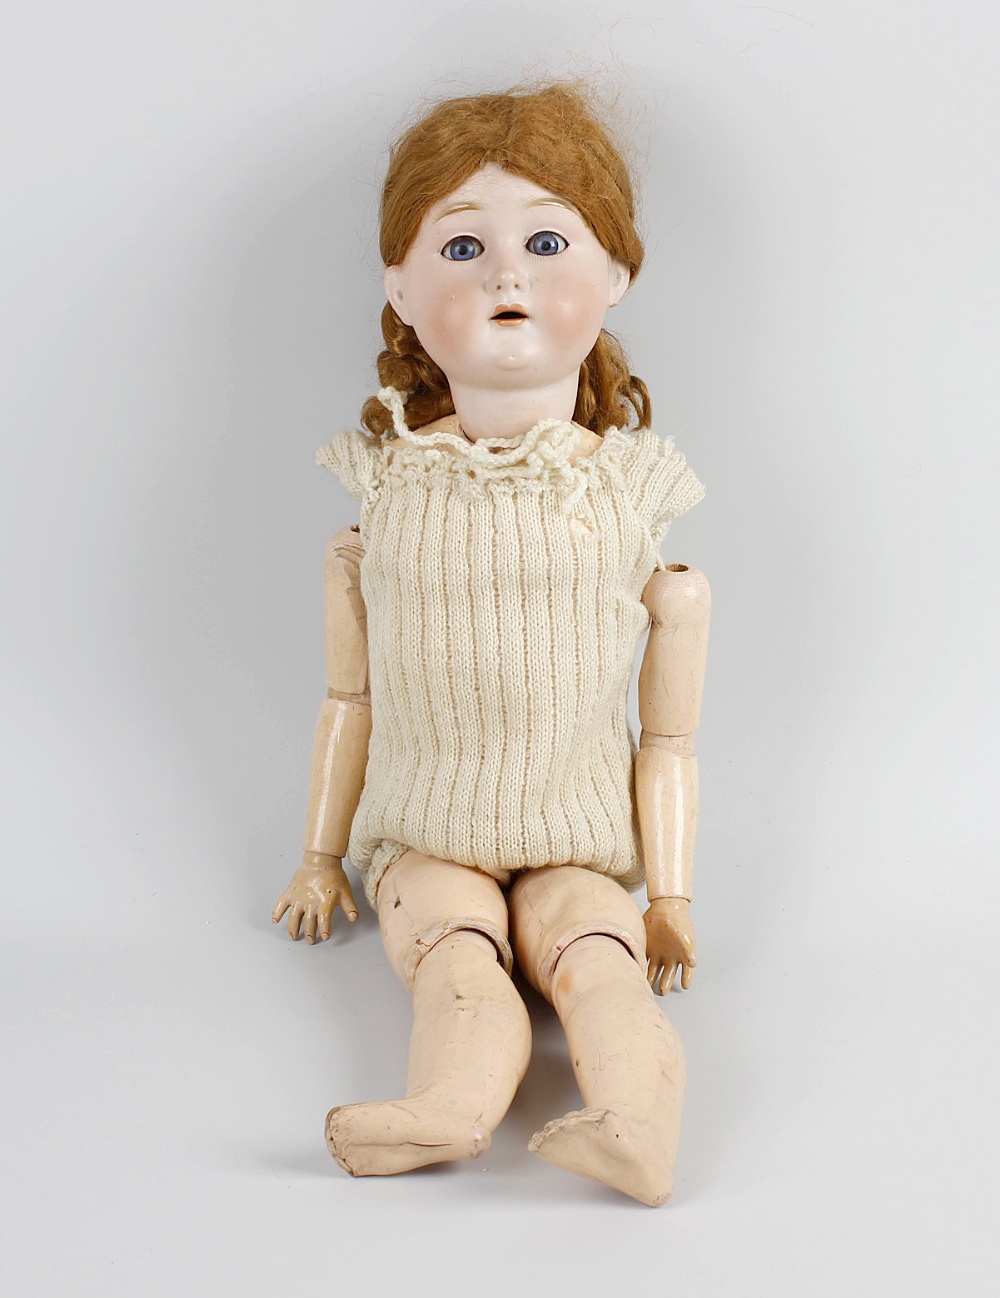 An A W German bisque headed doll, modelled as a young girl with opening blue glass eyes and partly